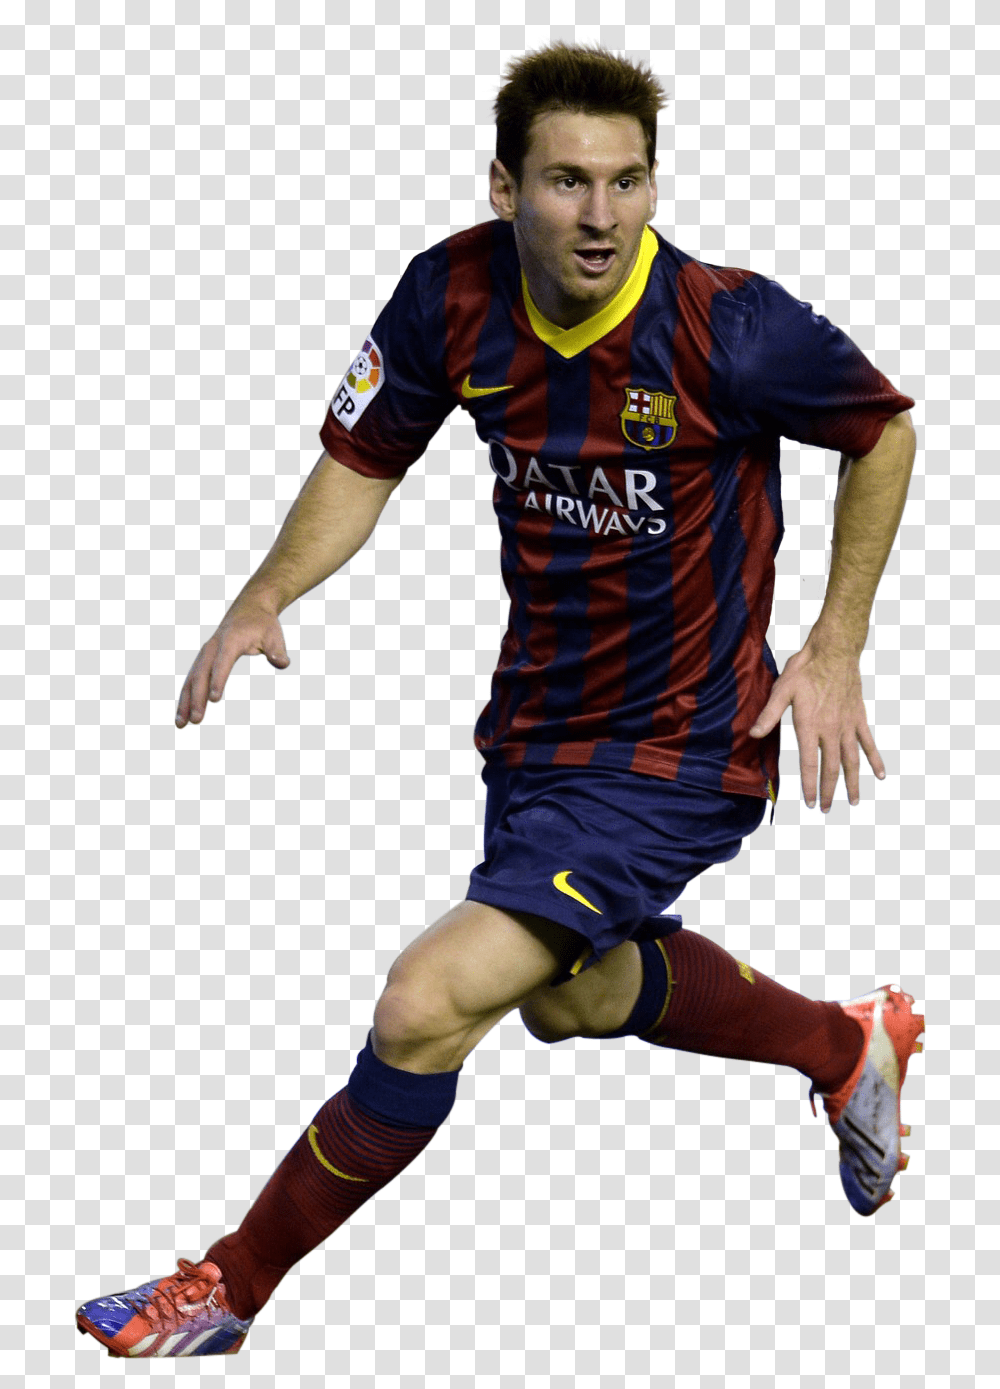 Download Fifa Liga La Messi Cup Lionel Messi Background, Sphere, Shorts, Clothing, Person Transparent Png